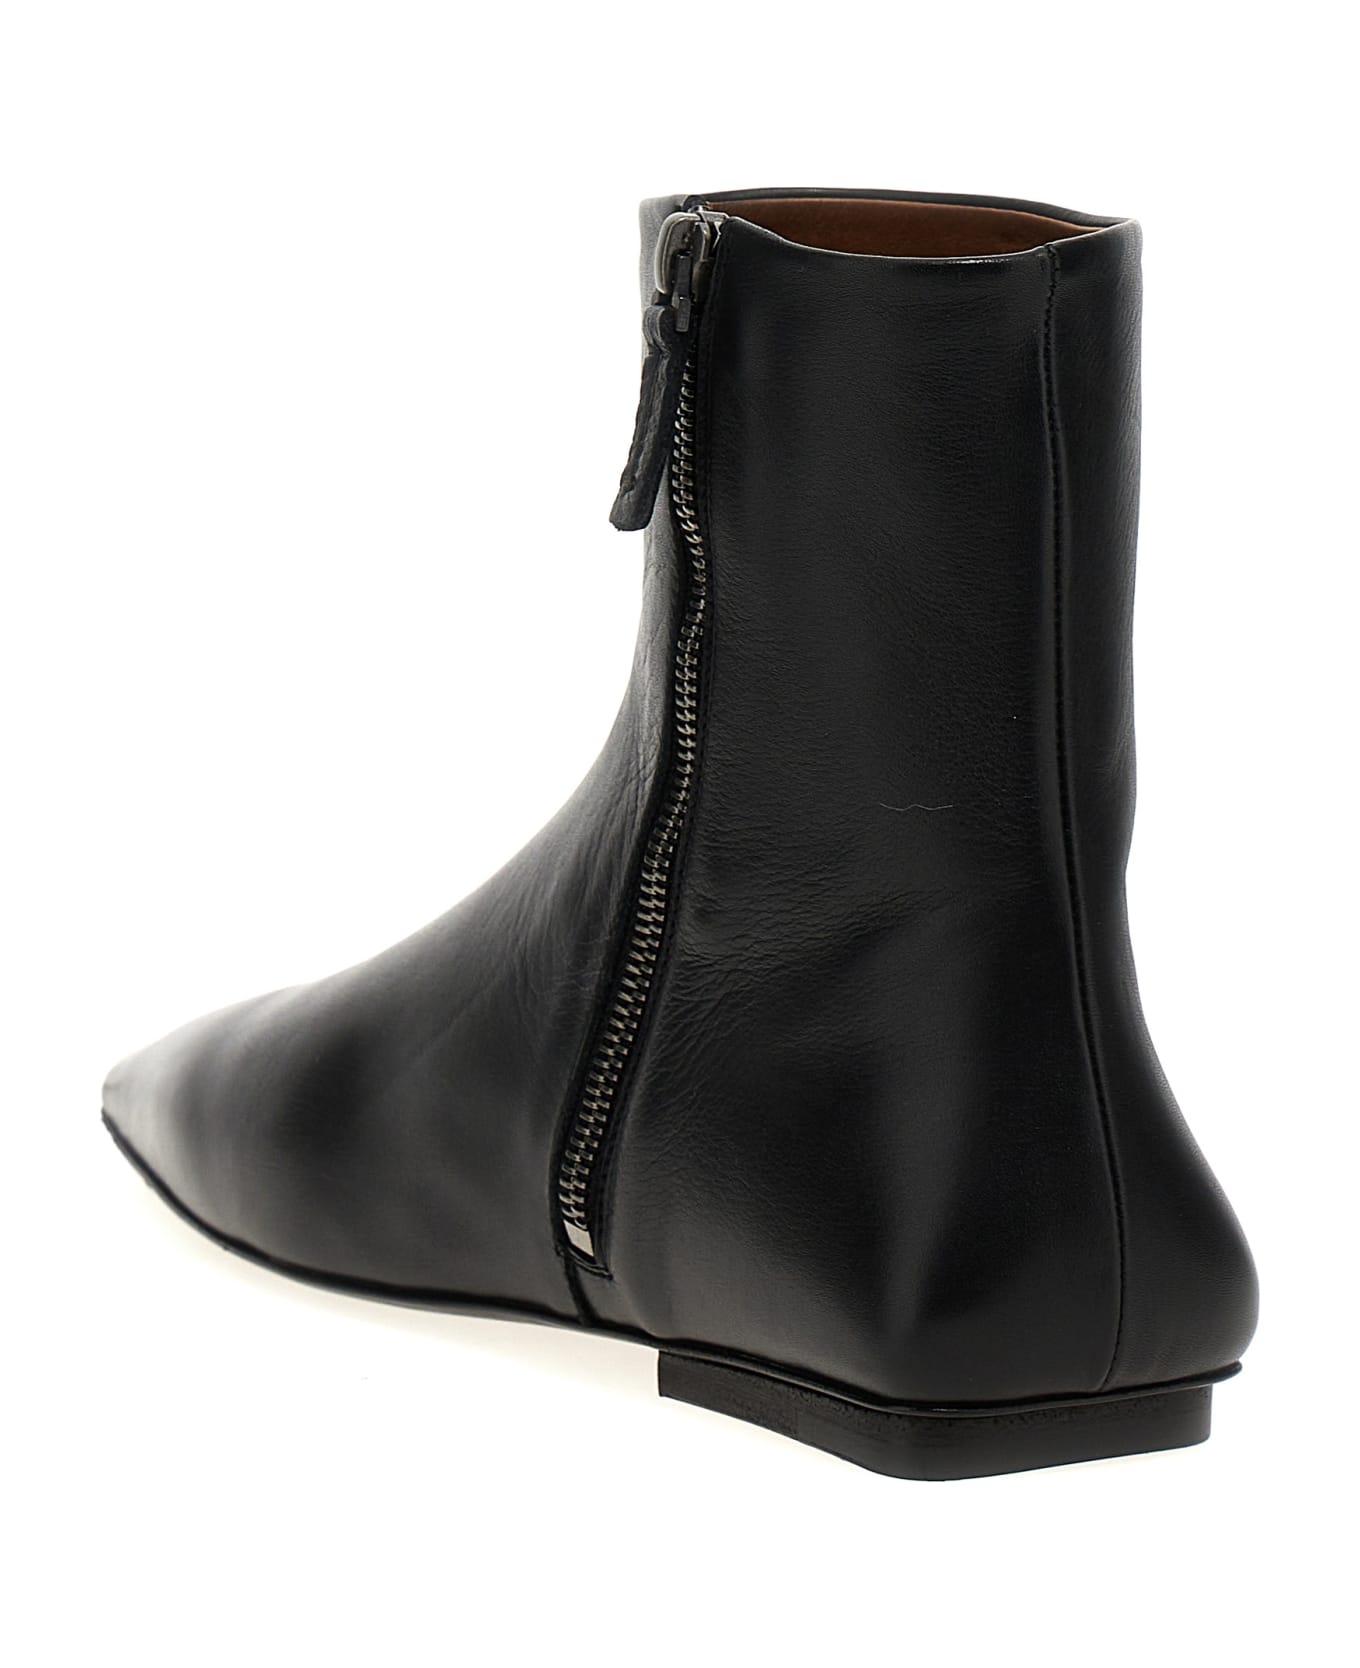 Marsell 'ago' Ankle Boots - Black  